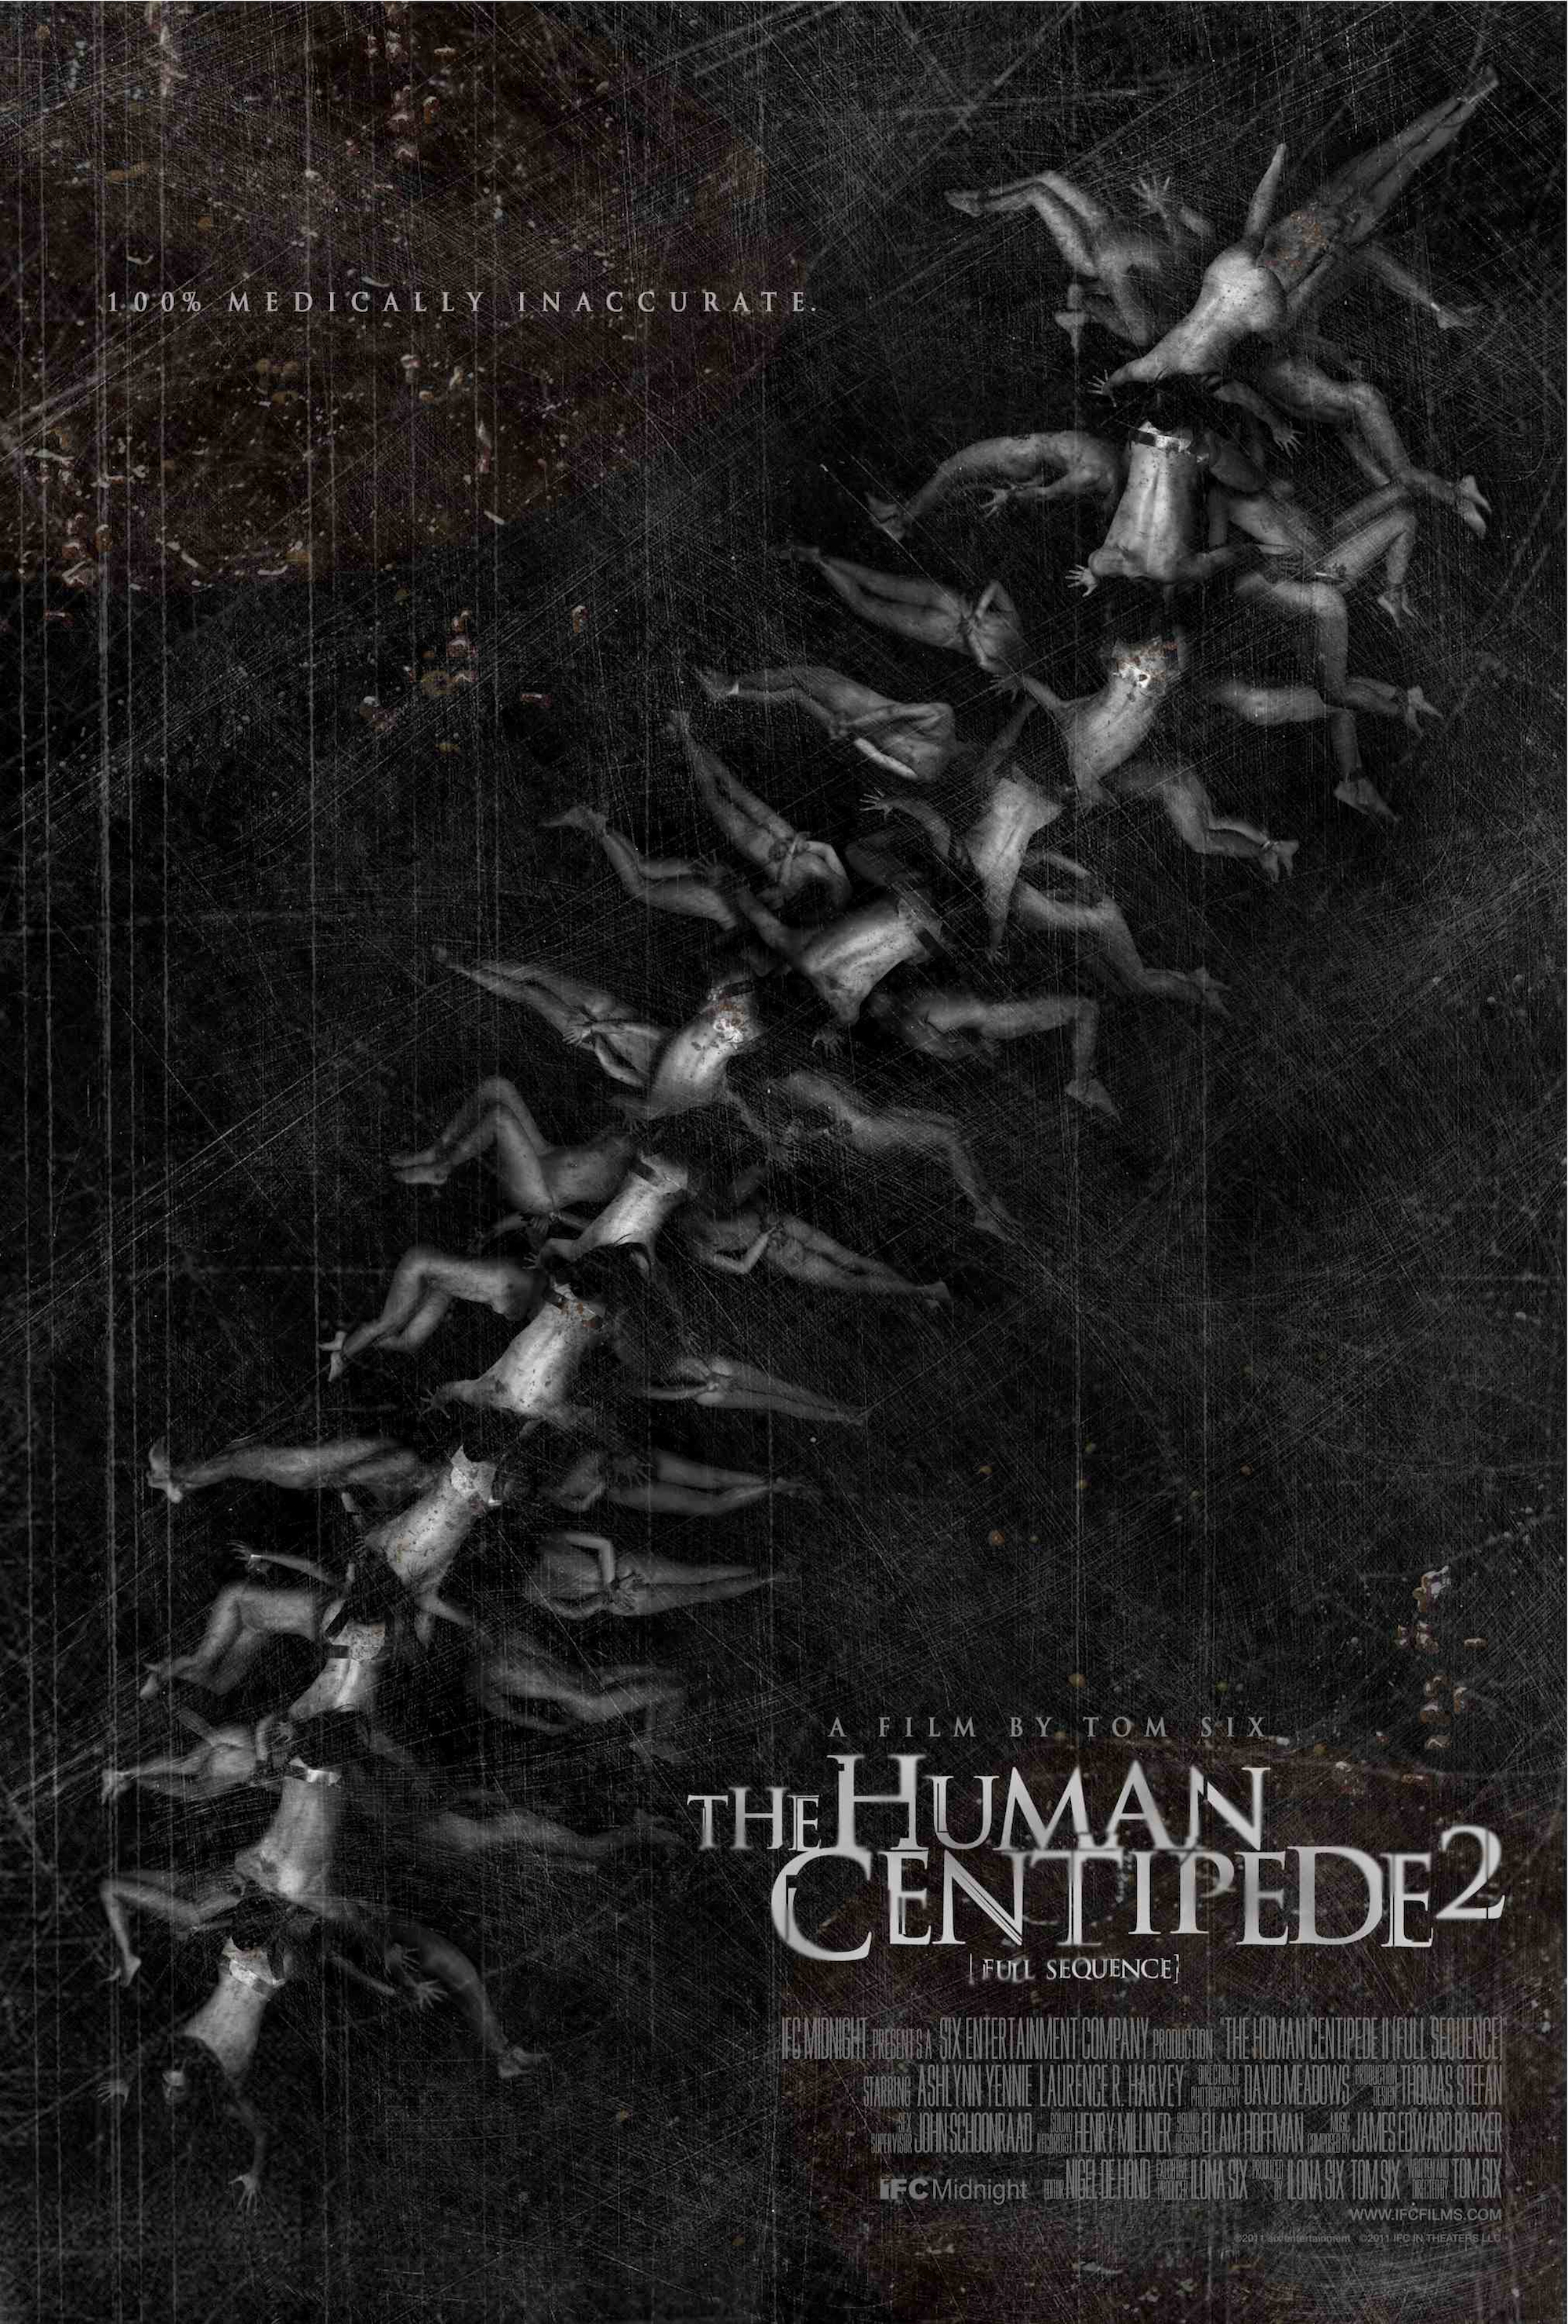 Sixwwxw - The Human Centipede 2 (Full Sequence) | Film Review | Tiny Mix Tapes